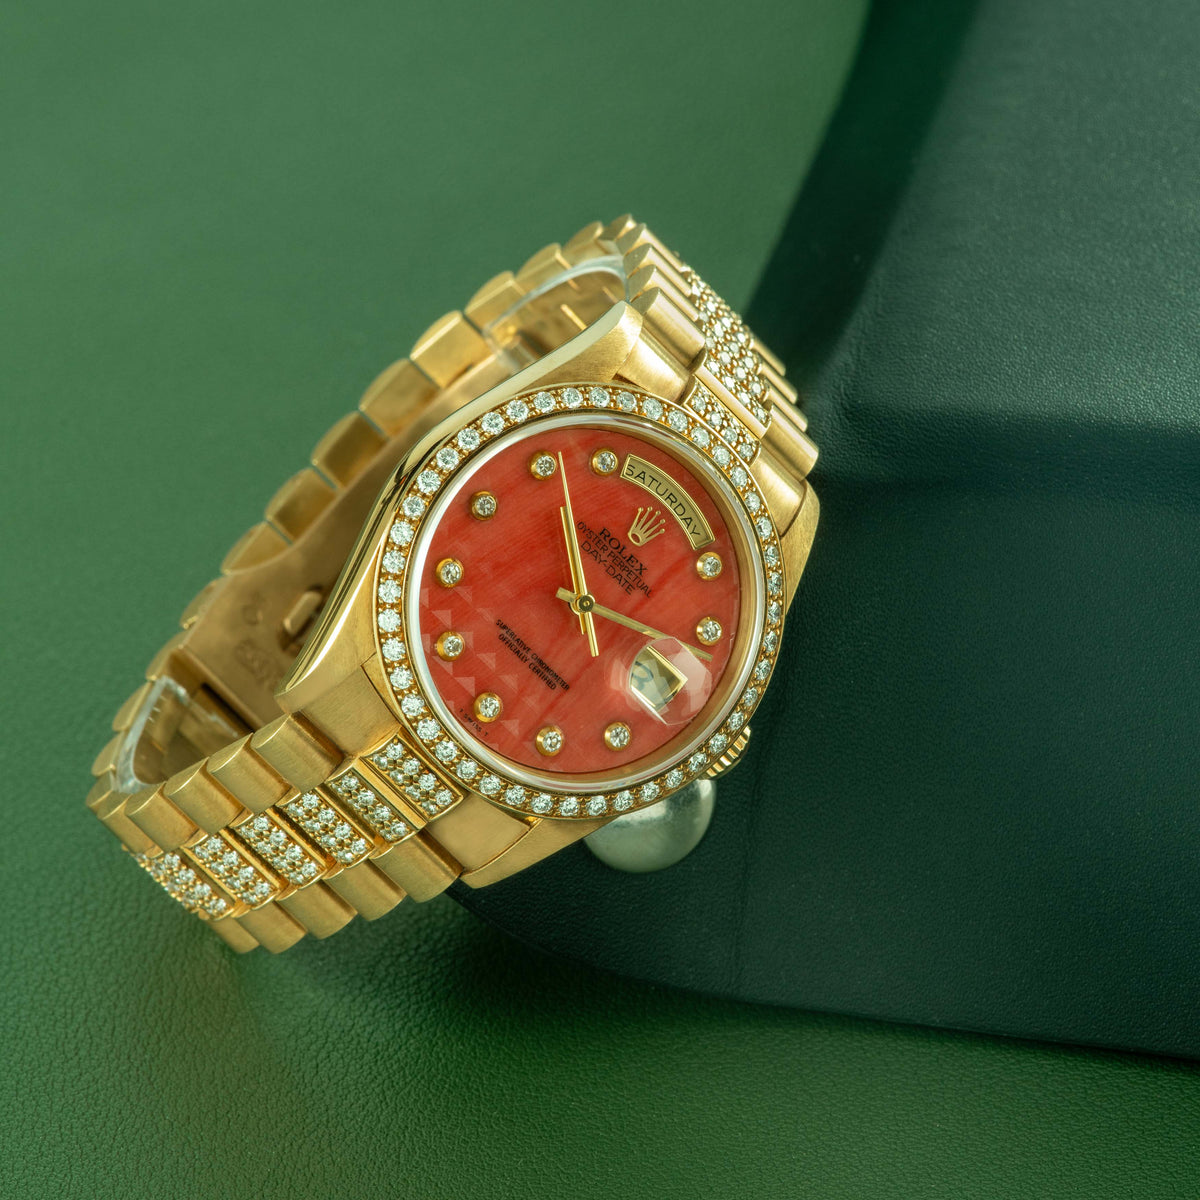 1993 Rolex Day Date Crown Collection Pyramid Coral Dial Ref. 18348 (with papers)